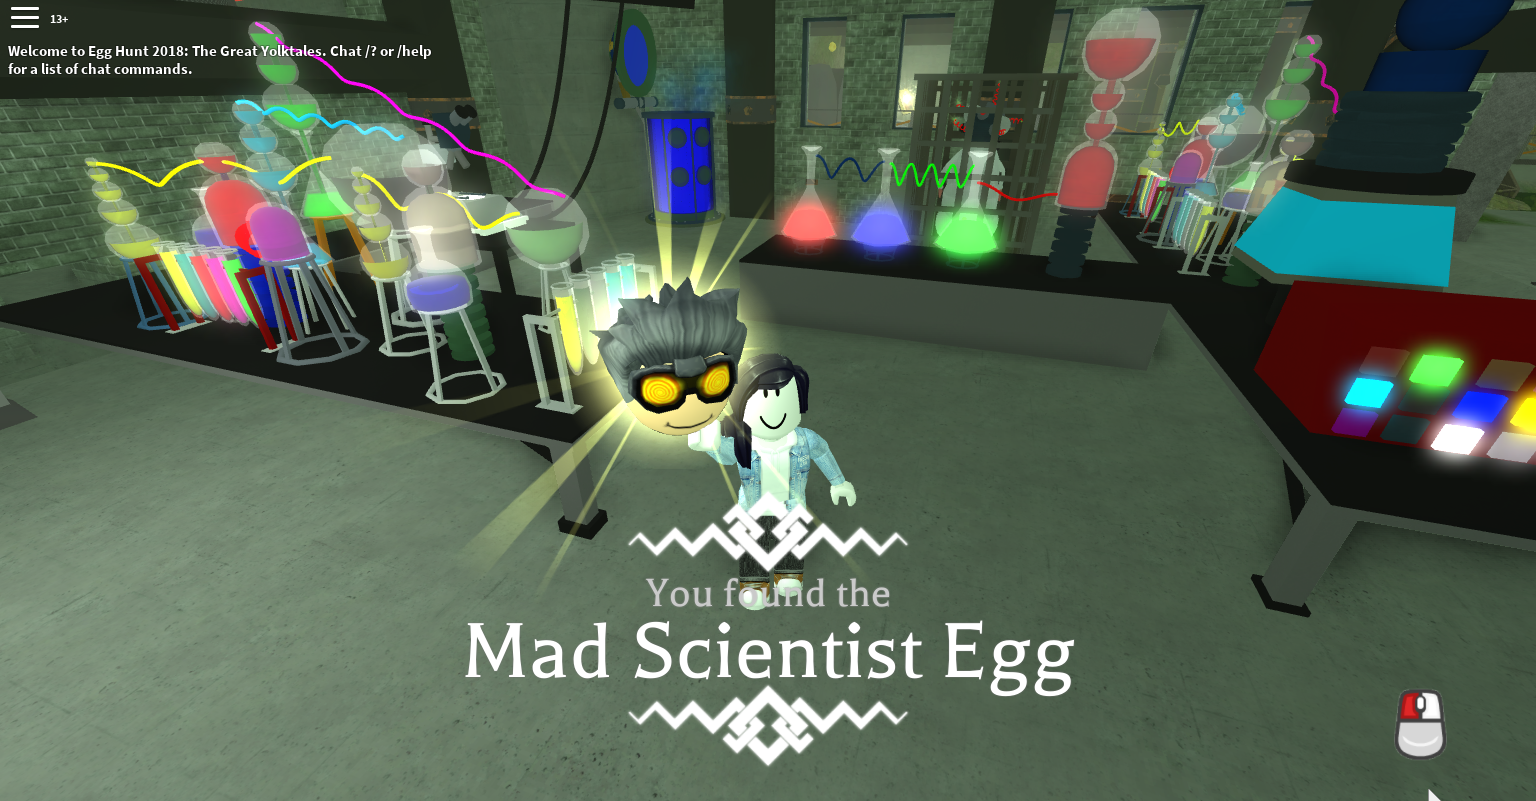 Aveyn S Blog Roblox Egg Hunt 2018 How To Find All The Egg!   s In - 1 mad scientist egg